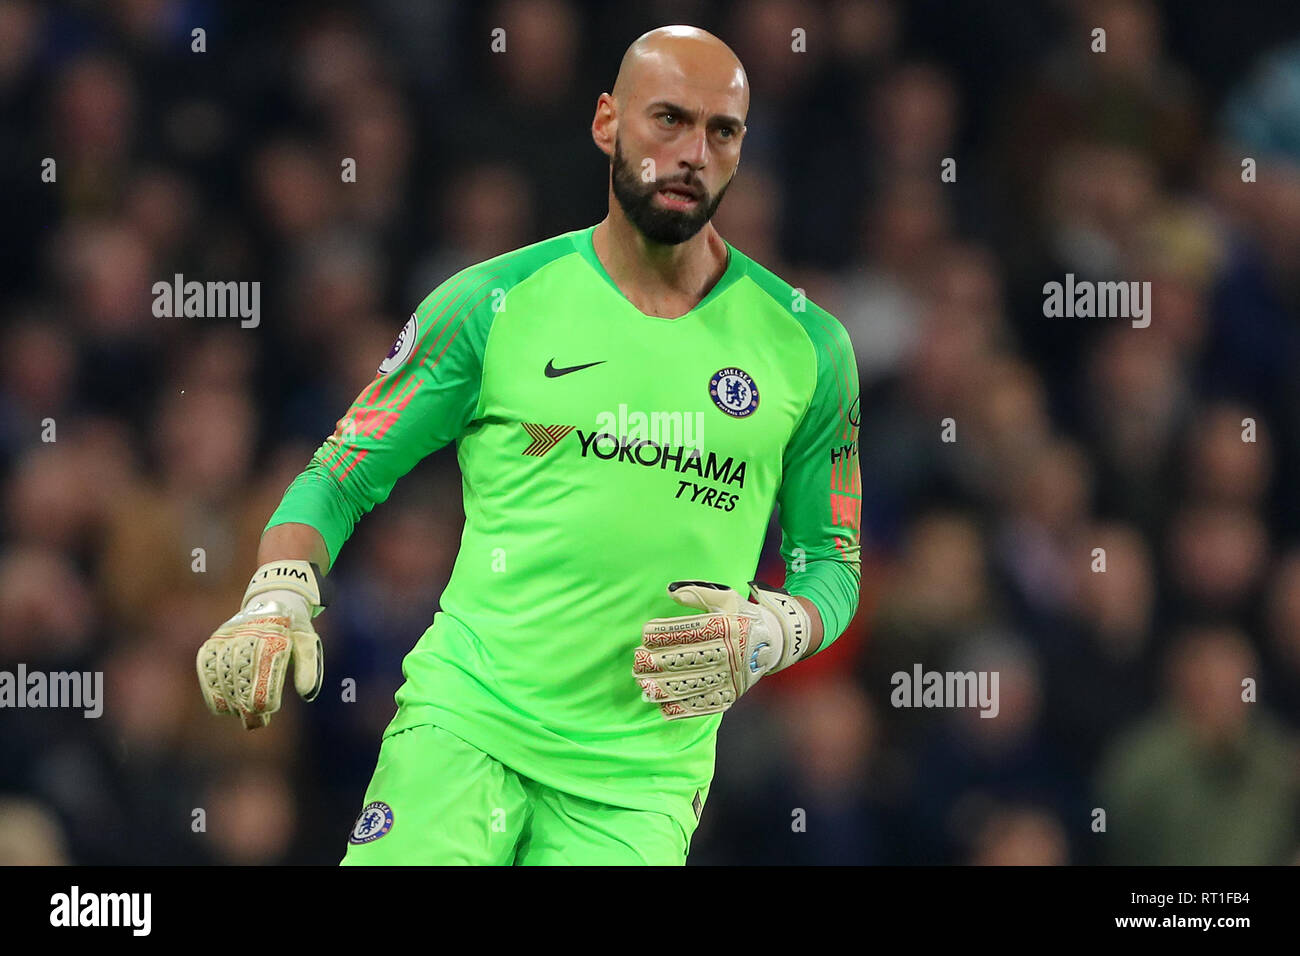 London, UK. 27th Feb, 2019. Wilfredo Caballero of Chelsea - Chelsea v Tottenham Hotspur, Premier League, Stamford Bridge, London - 27th February 2019 Editorial Use Only - DataCo restrictions apply Credit: MatchDay Images Limited/Alamy Live News Stock Photo